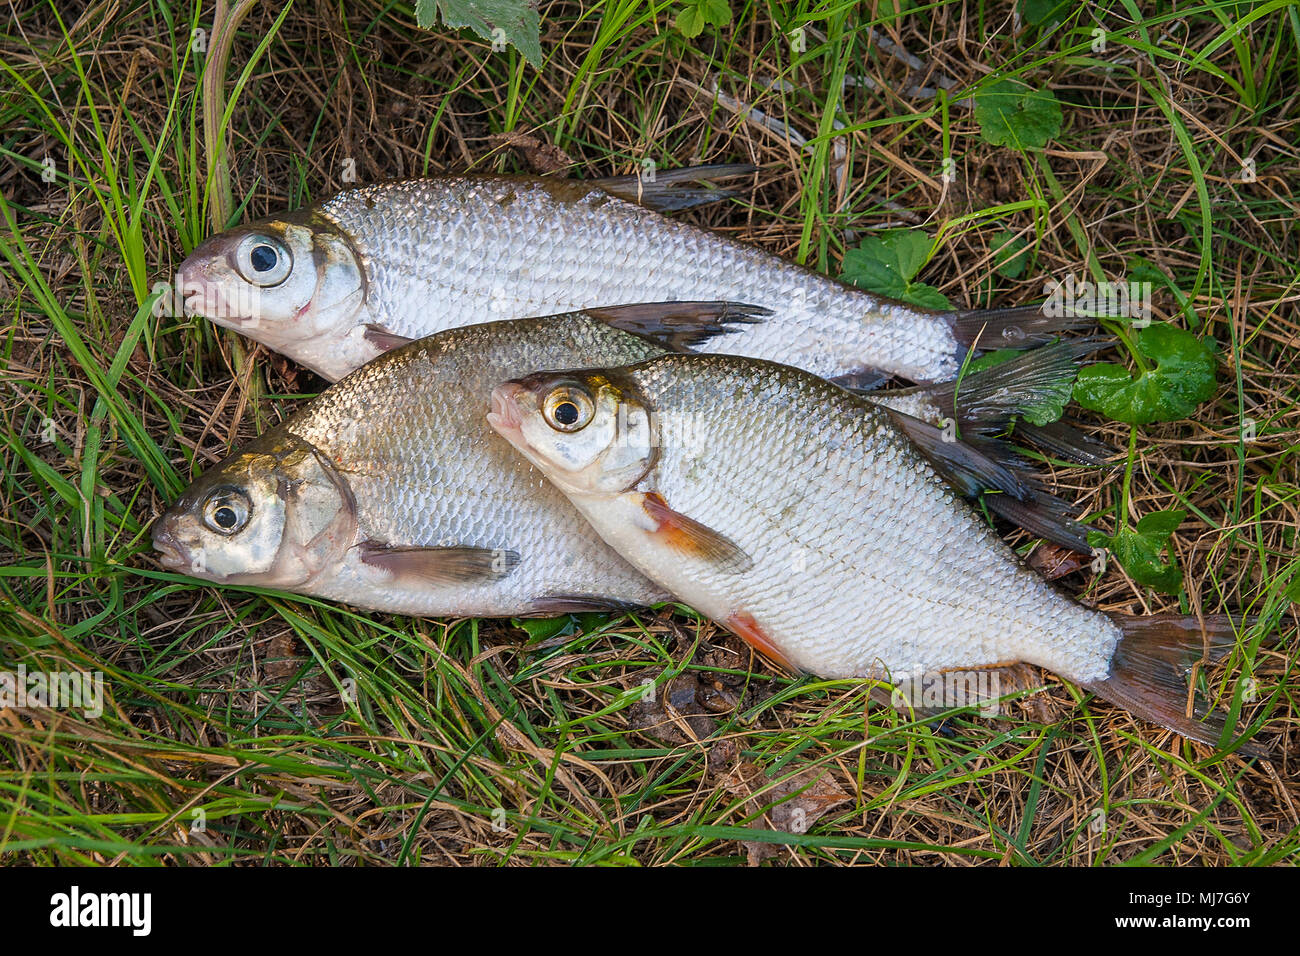 Several just taken from the water freshwater common bream known as bronze bream or carp bream (Abramis brama) and white bream or silver fish known as  Stock Photo